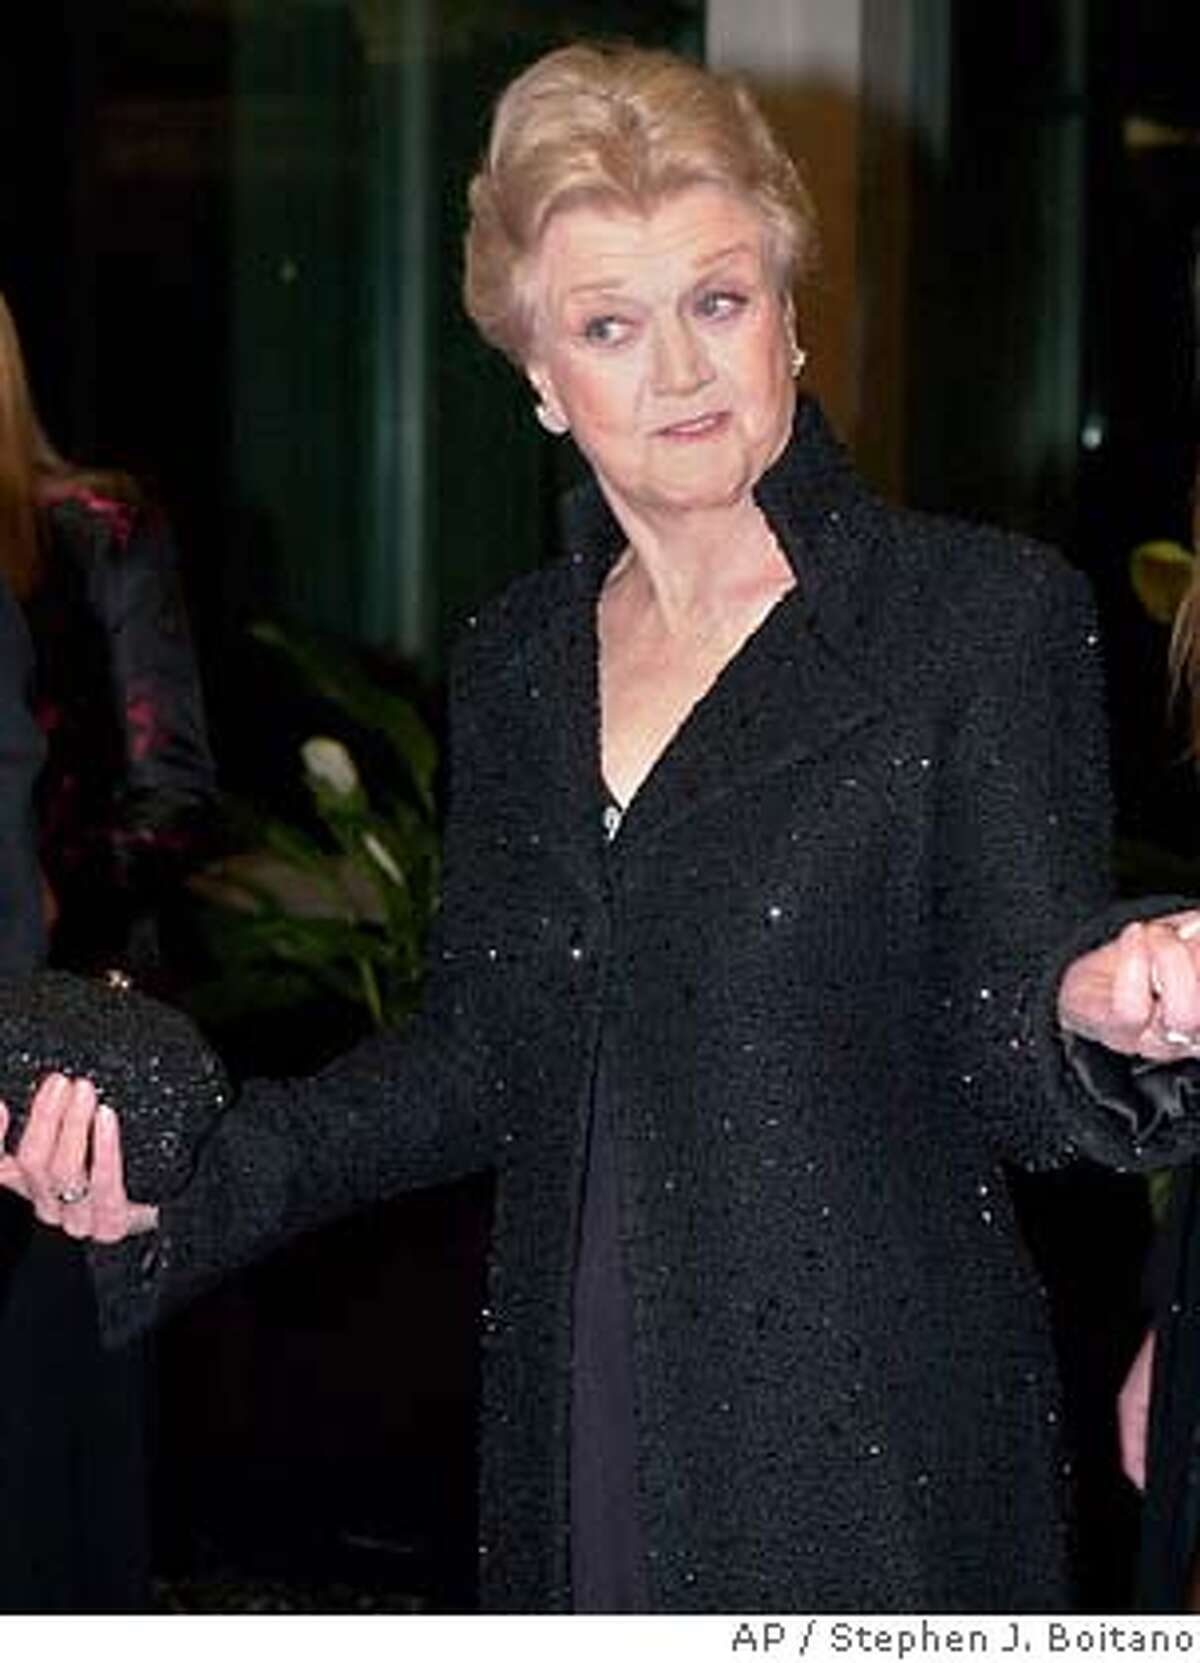 Actress Angela Lansbury enters the State Department building for the Kennedy Center Honors dinner Saturday night, Dec. 2, 2000, in Washington. Lansbury is among this year's award recipients. (AP Photo/Stephen J. Boitano) DITIAL IMAGE Datebook#Datebook#Chronicle#12/01/2004##Advance##422095995